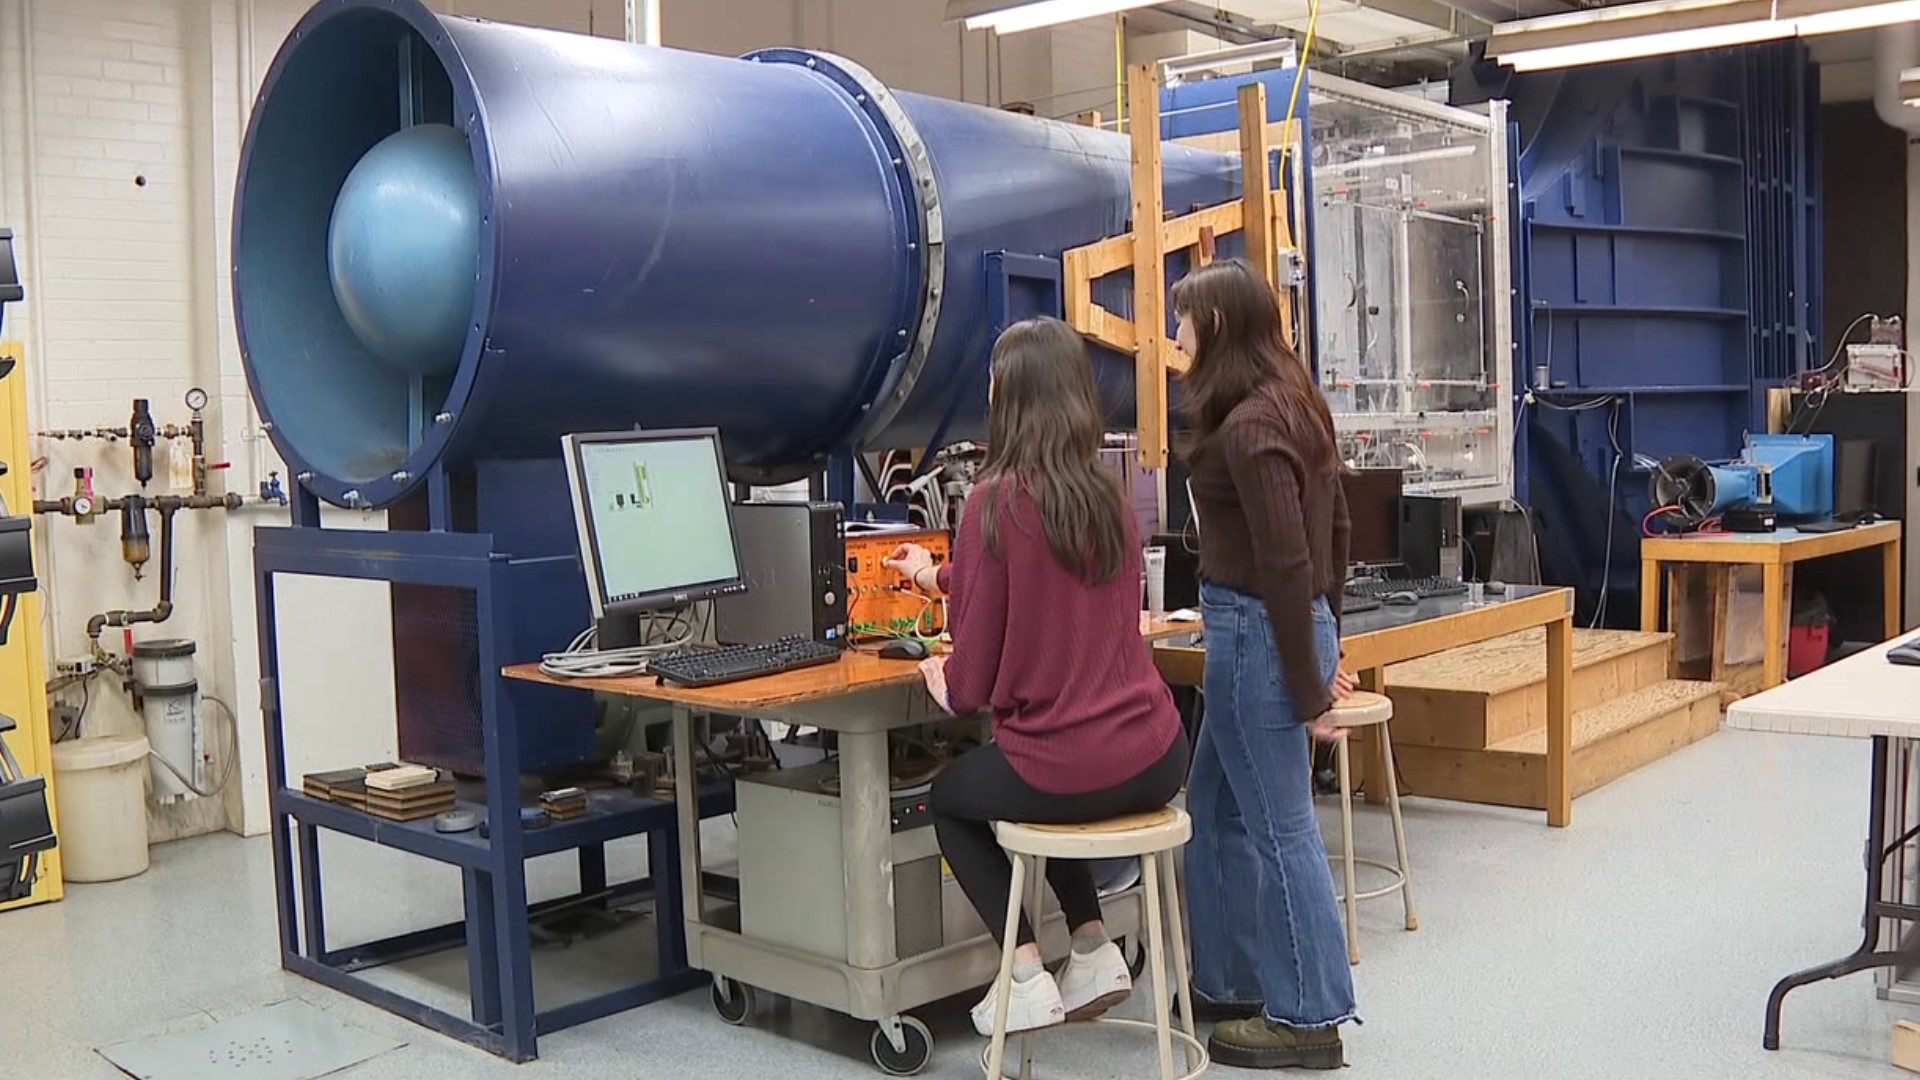 Bucknell University is marking Women's History Month with a milestone. The first woman graduated from the school's engineering program 100 years ago.